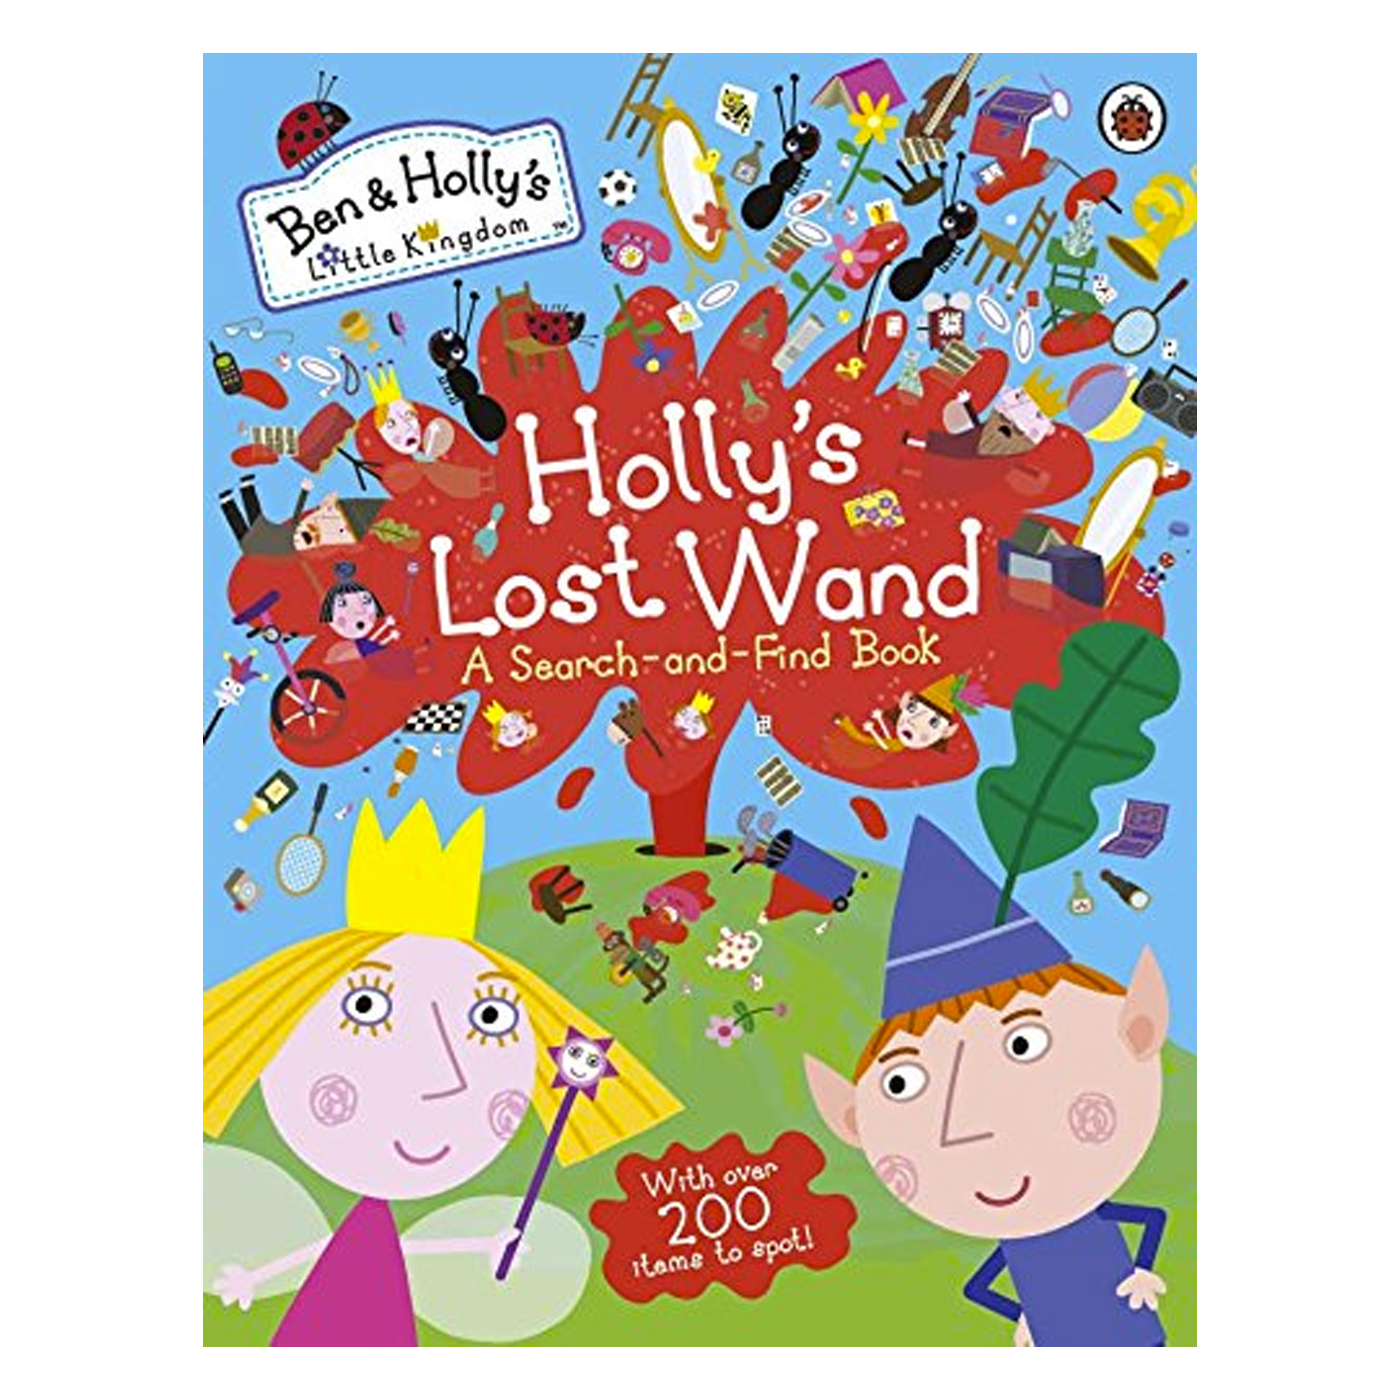  Ben And Hollys Little Kingdom: Hollys Lost Wand - A Search-and-Find Book